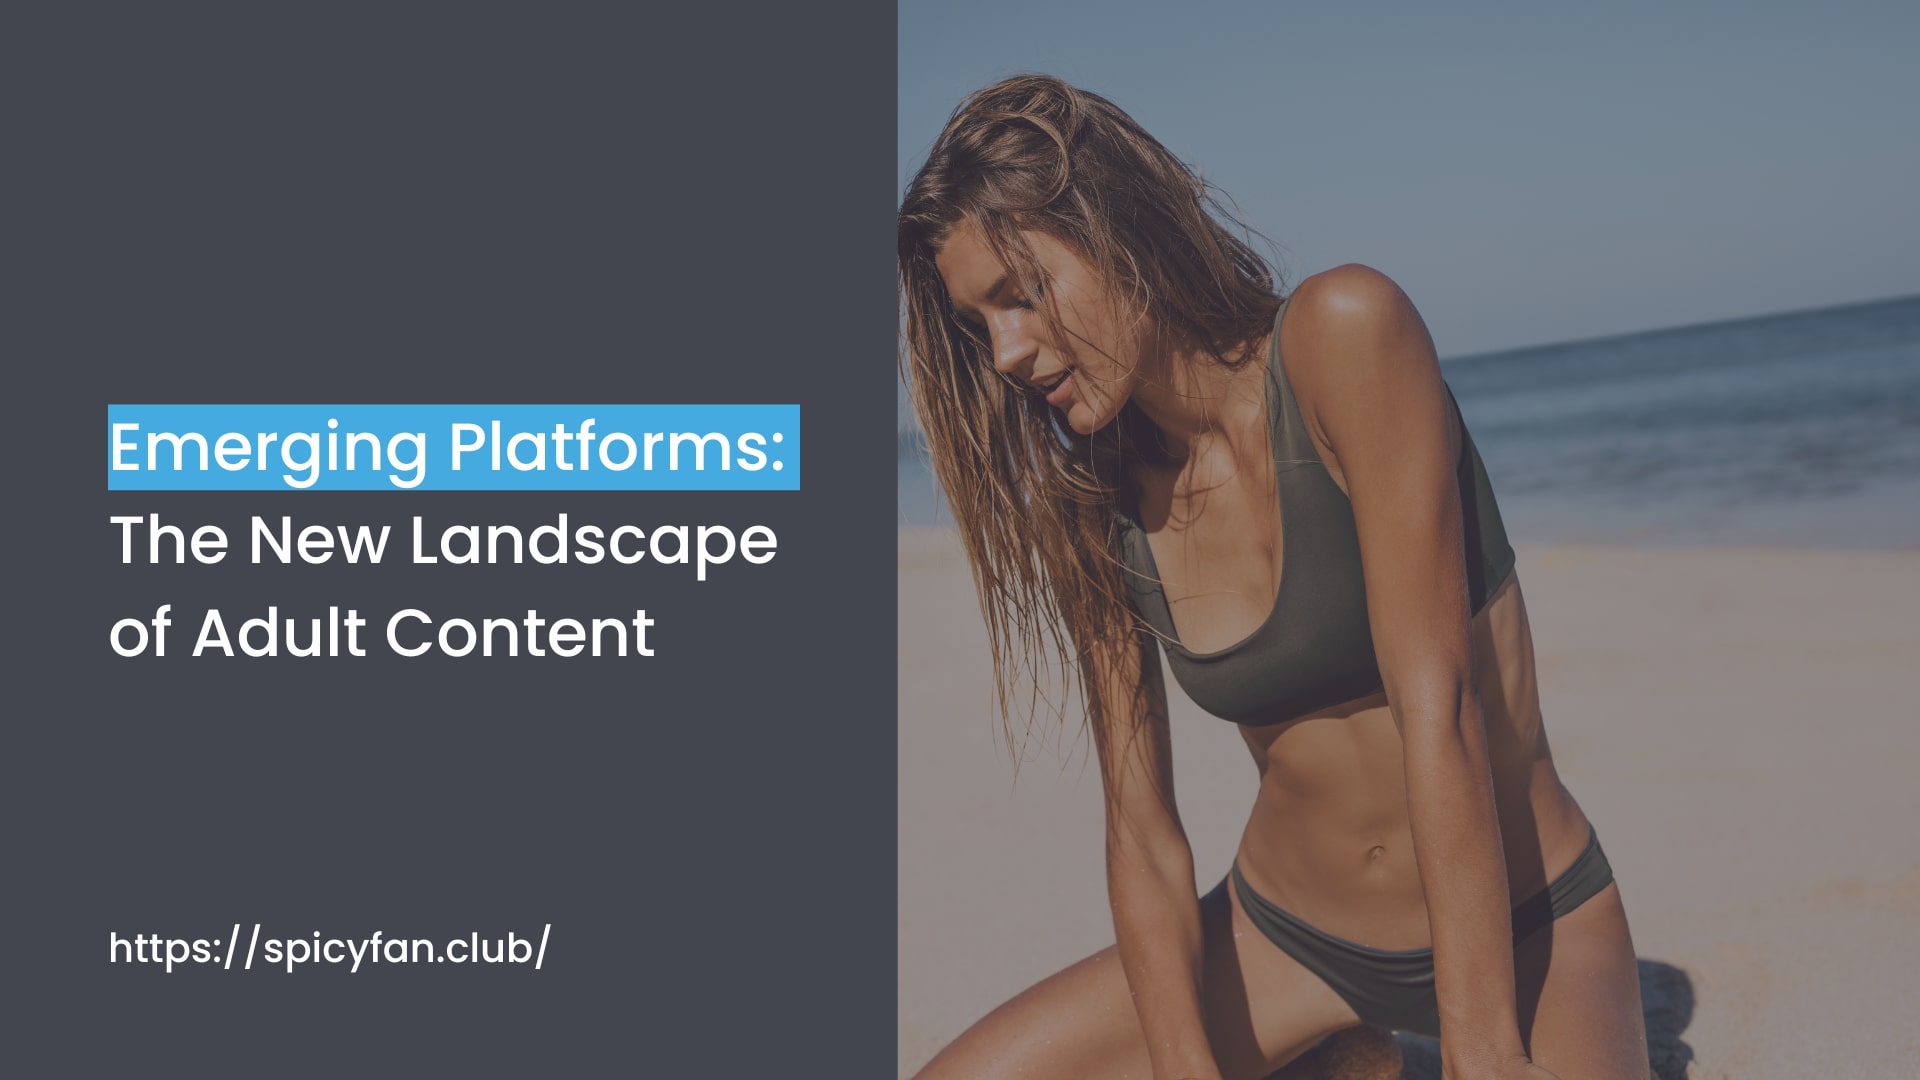 Emerging Platforms: The New Landscape of Adult Content